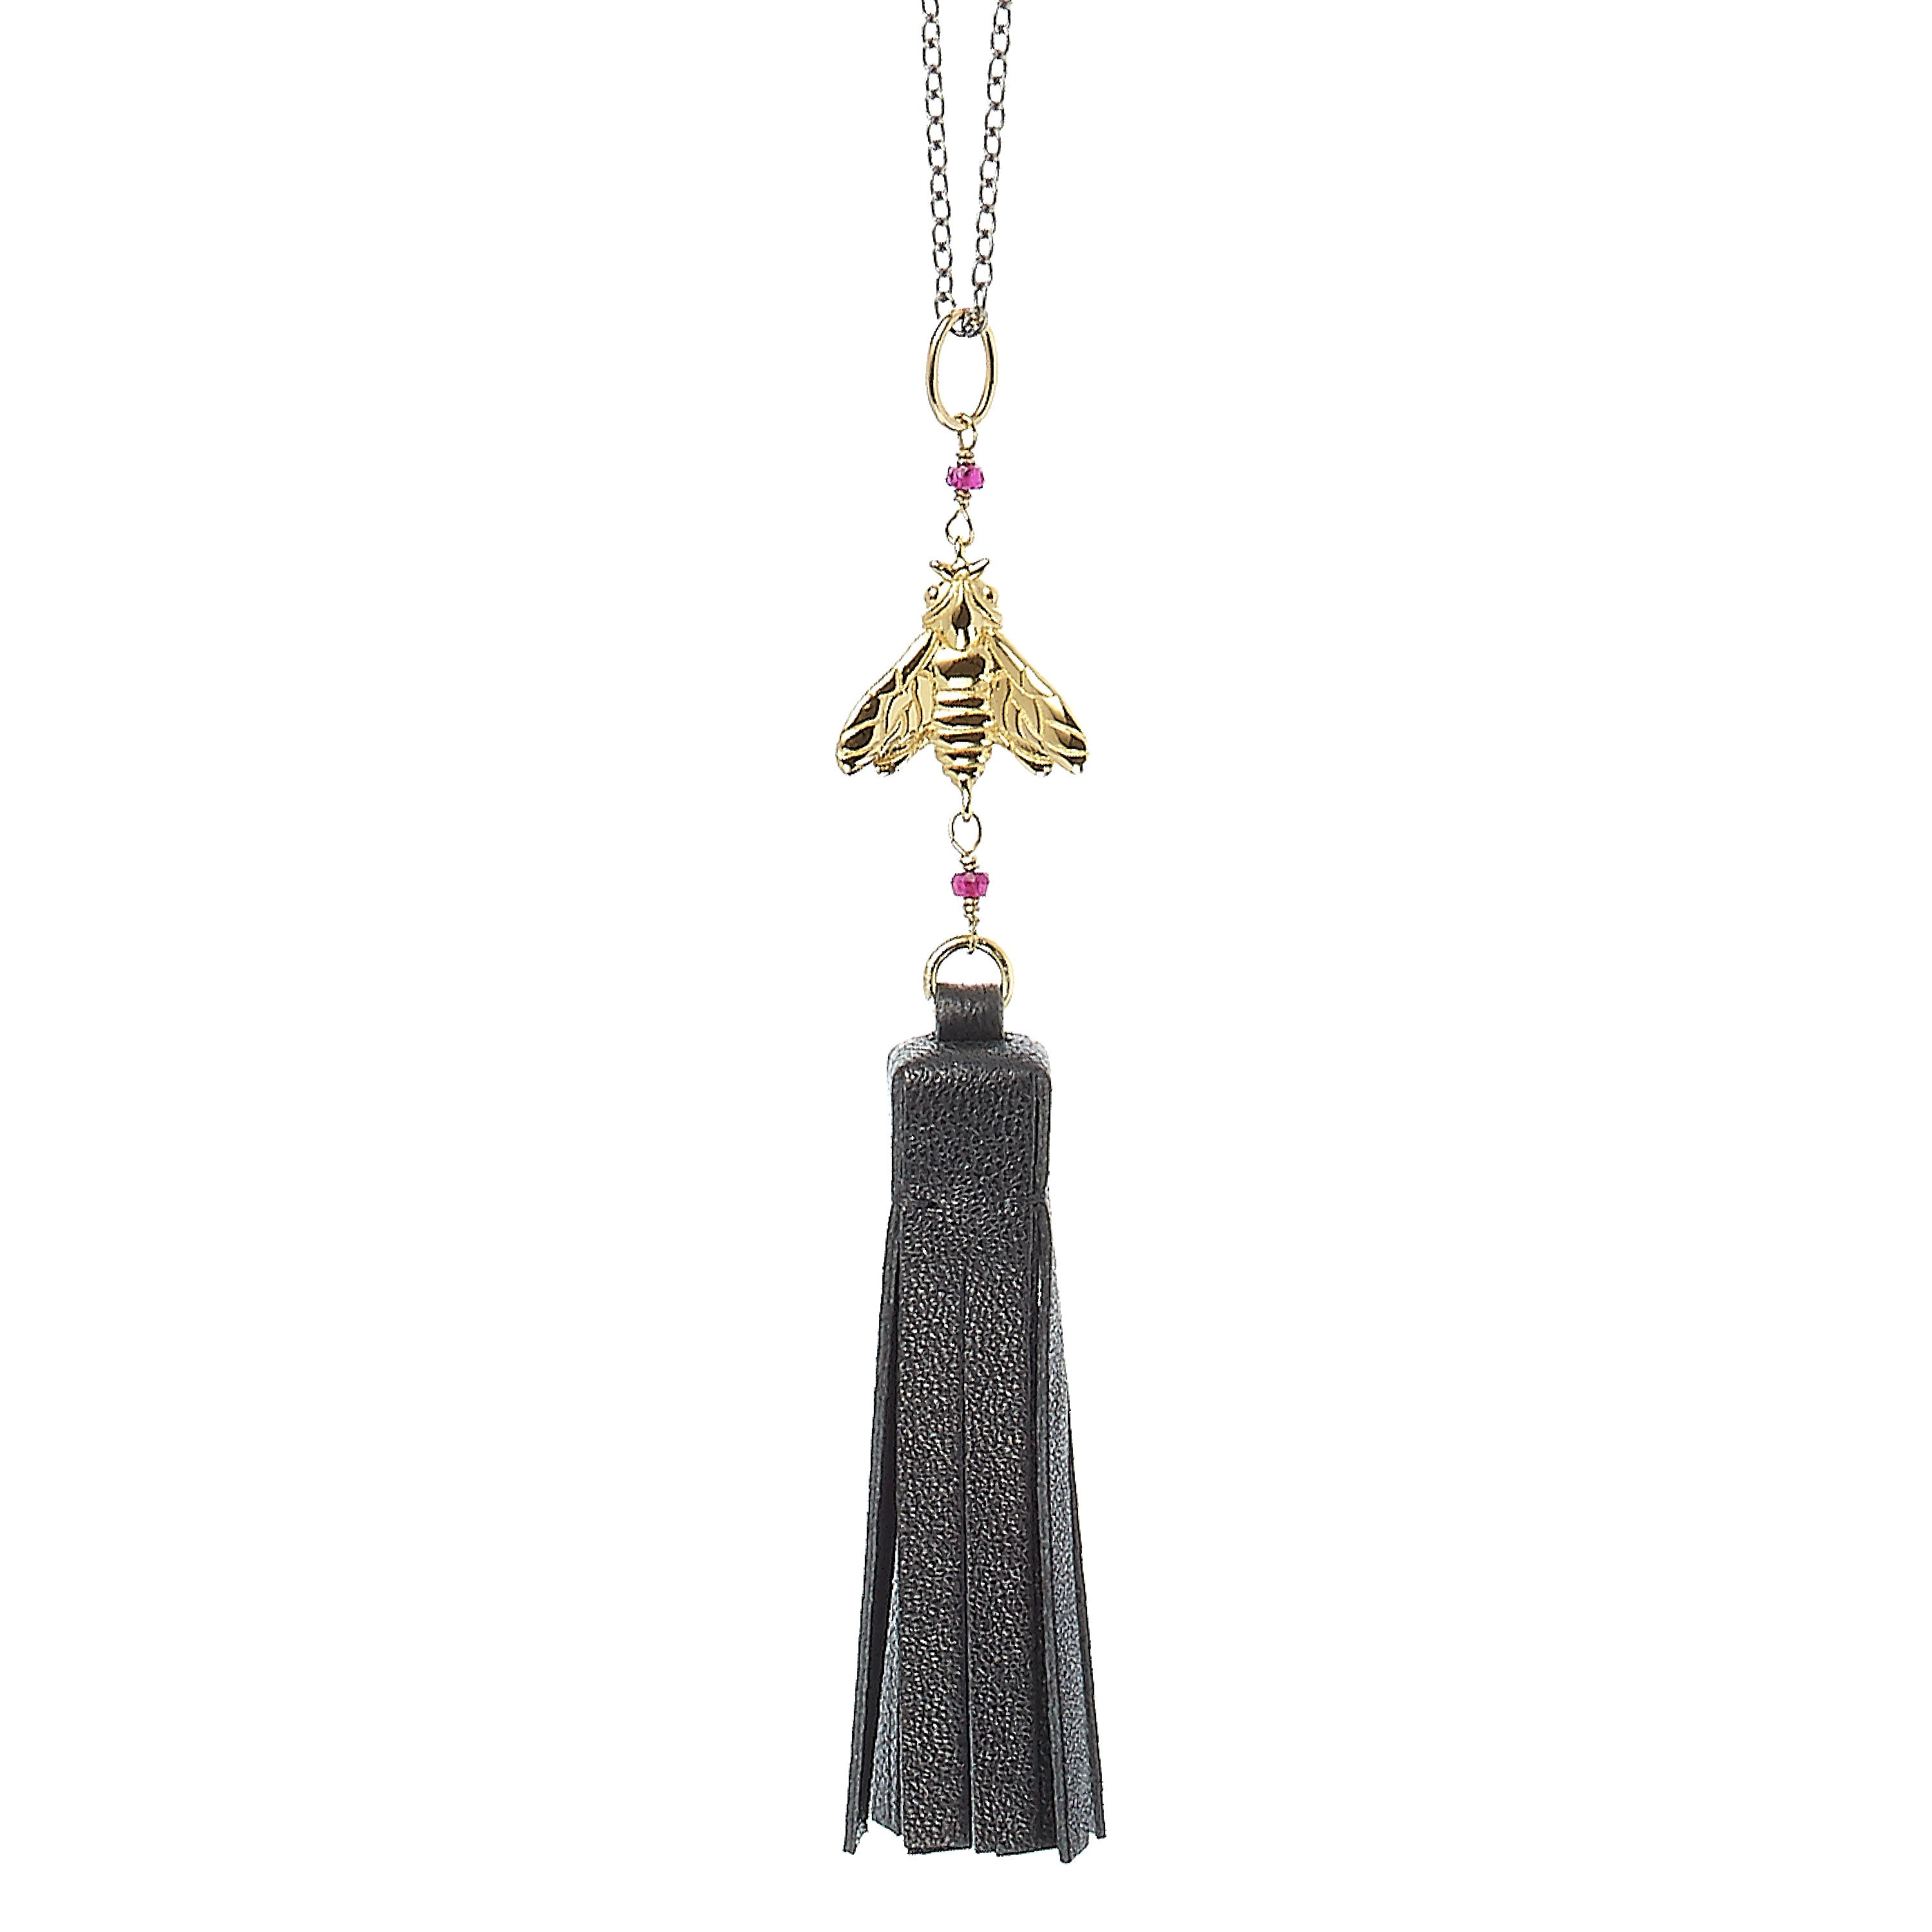 Bee Queen Necklace with Black Leather Tassel and Bees